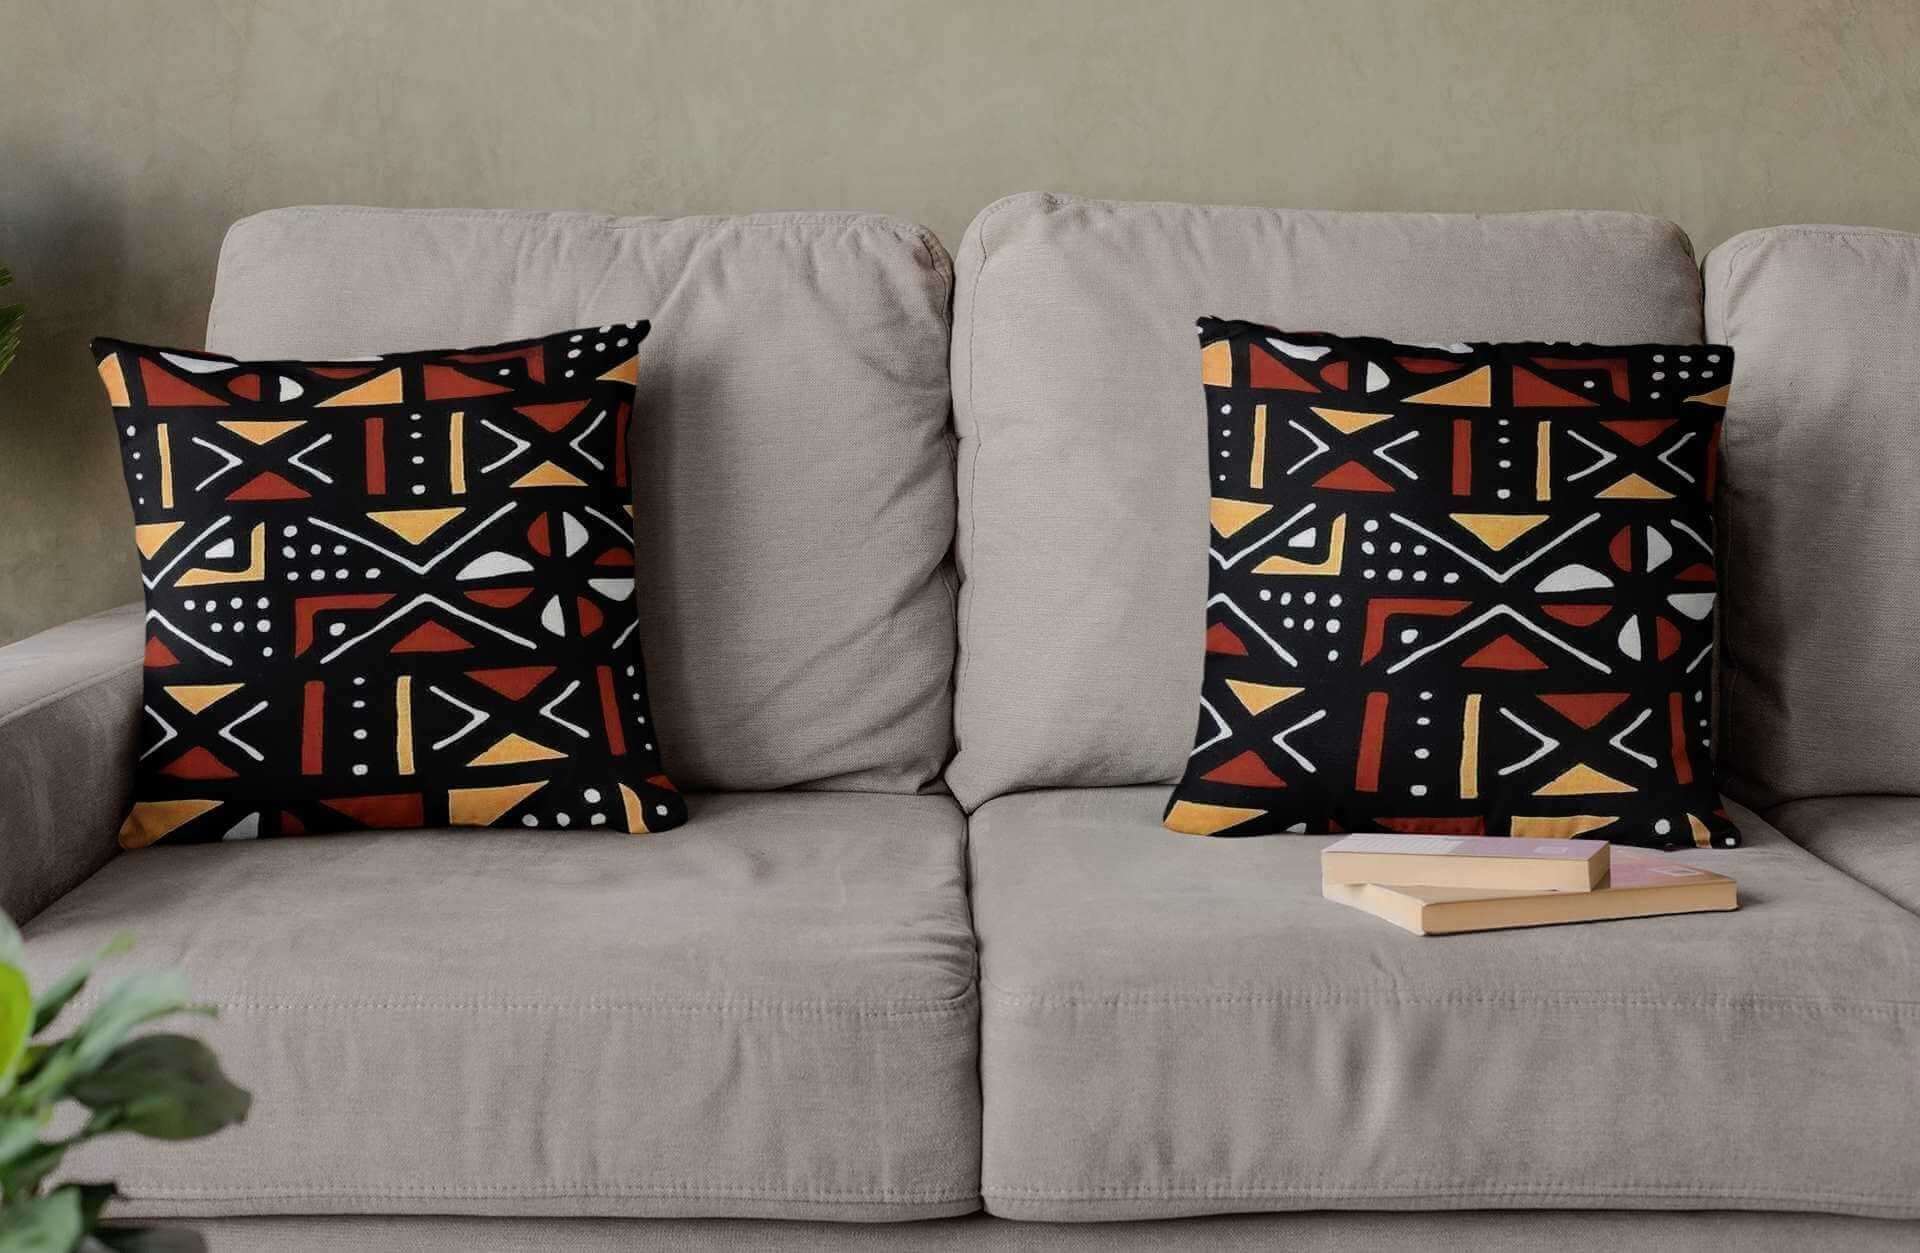 2 Sets of Bogolan Cushion Pillow Case Throw Cover - Bynelo